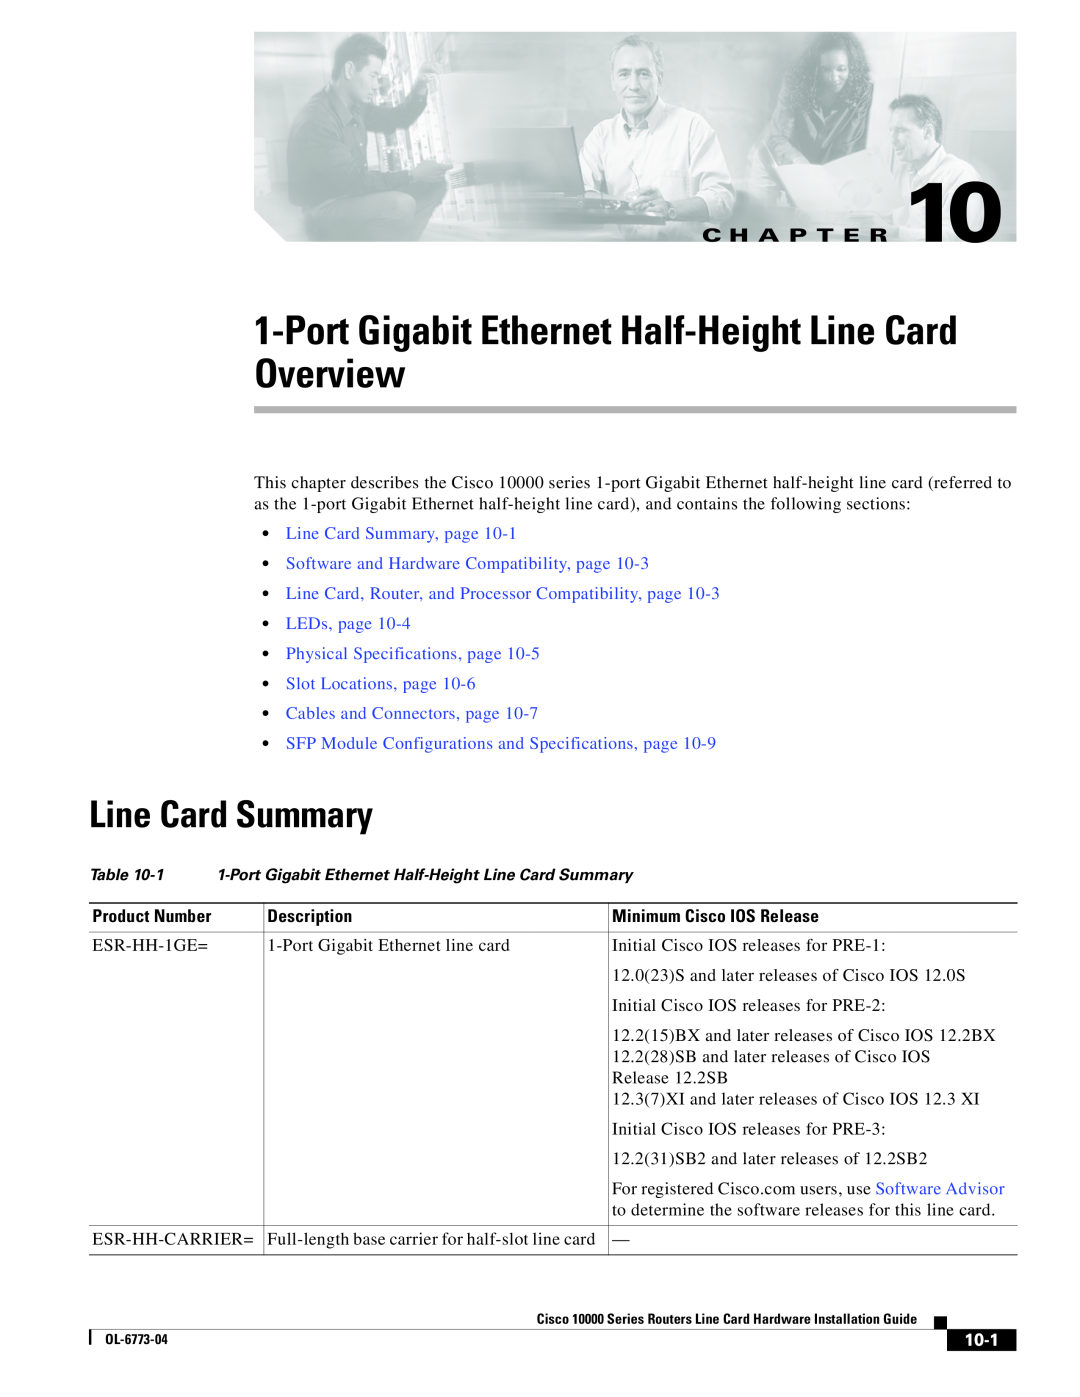 Cisco Systems 10000 Series specifications Line Card Summary, 10-1, Port Gigabit Ethernet Half-Height Line Card Overview 